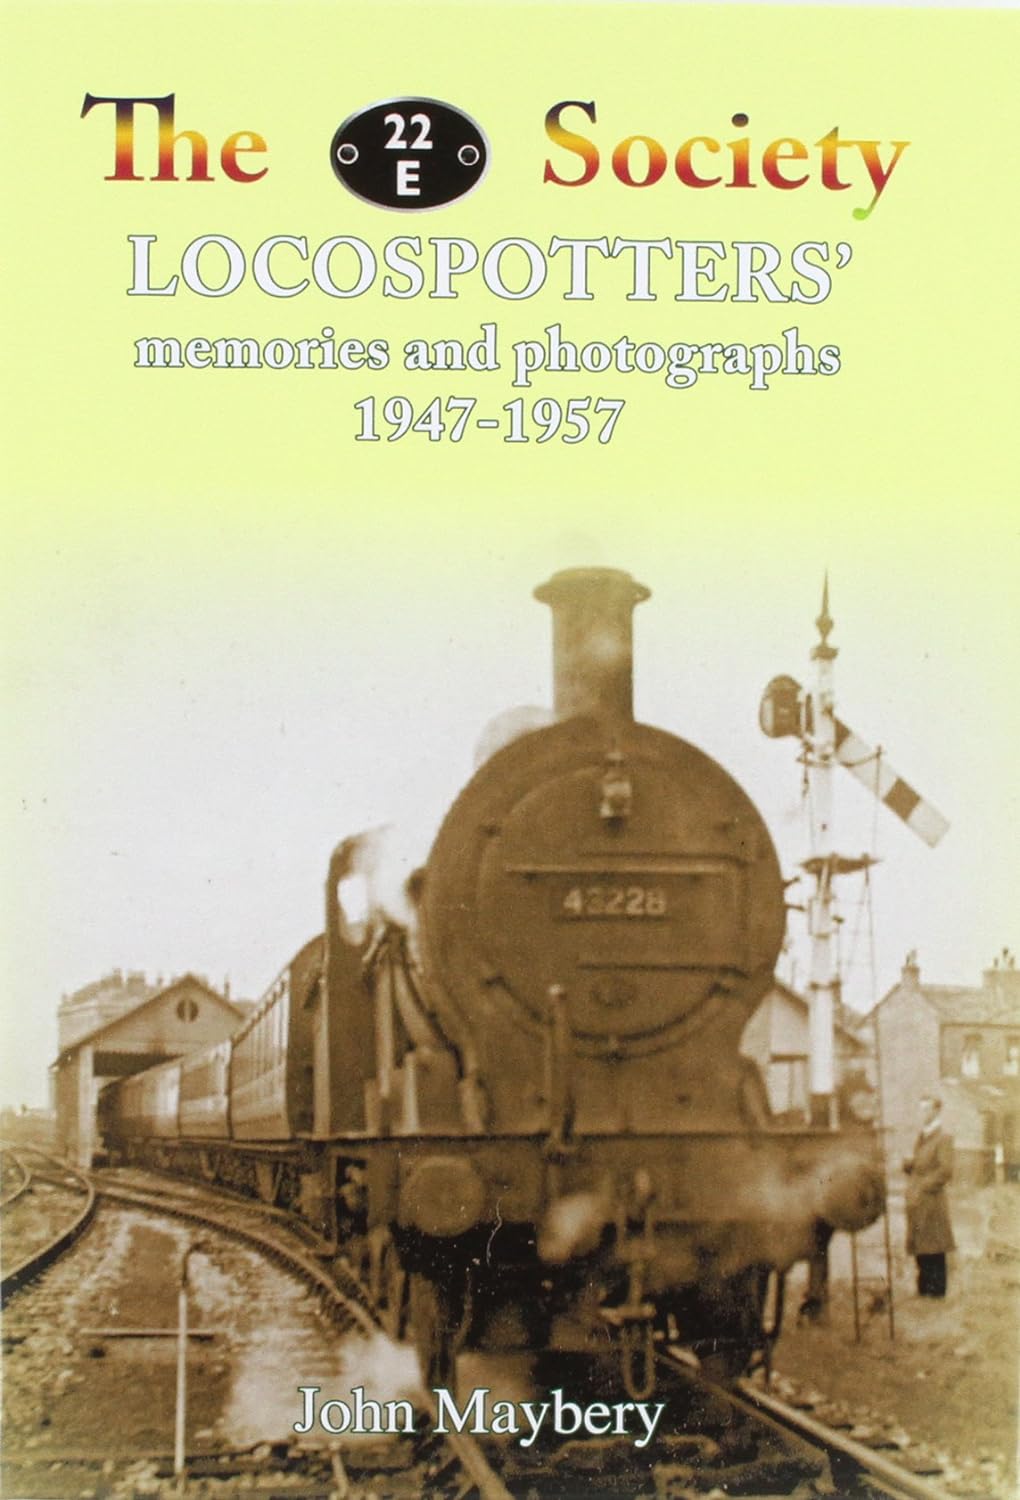 The  22E Society - Loco Spotters' Memories and Photographs 1947-1957